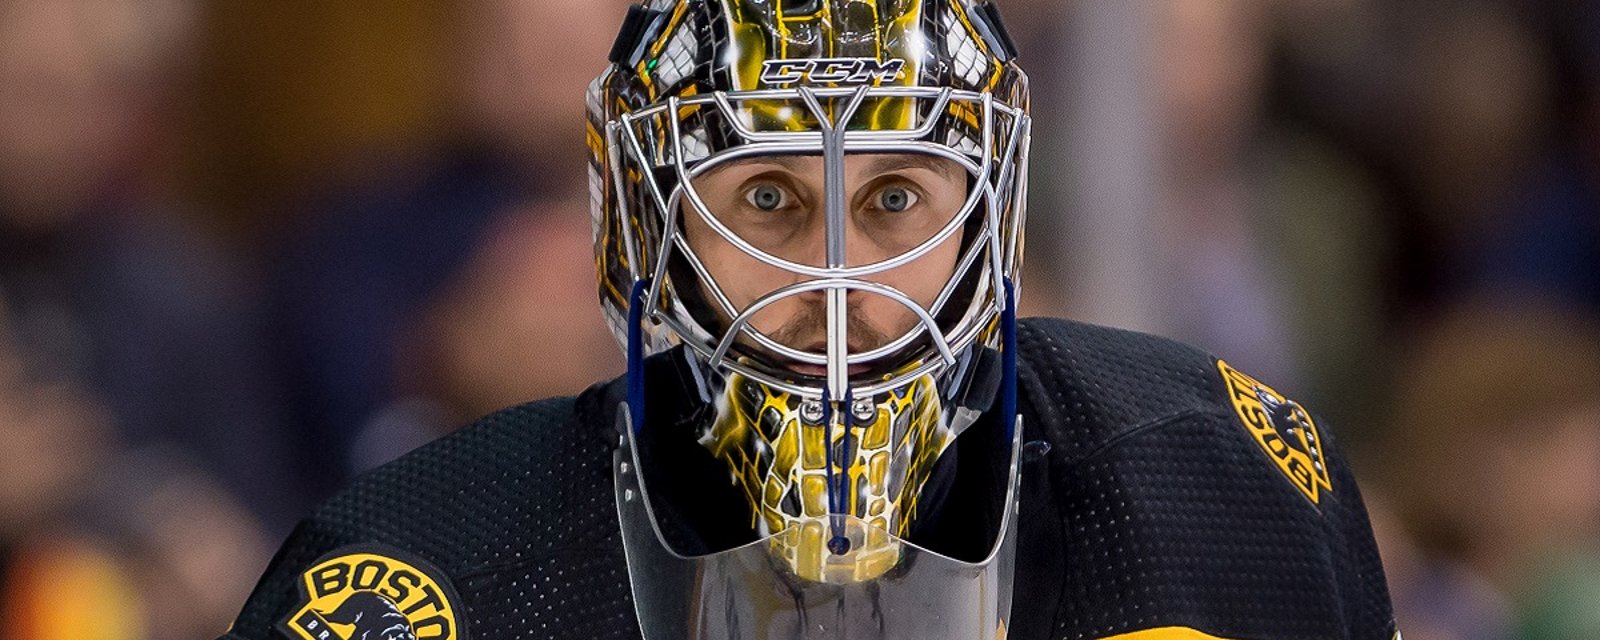 Coronavirus played a role in Halak re-signing with the Bruins.